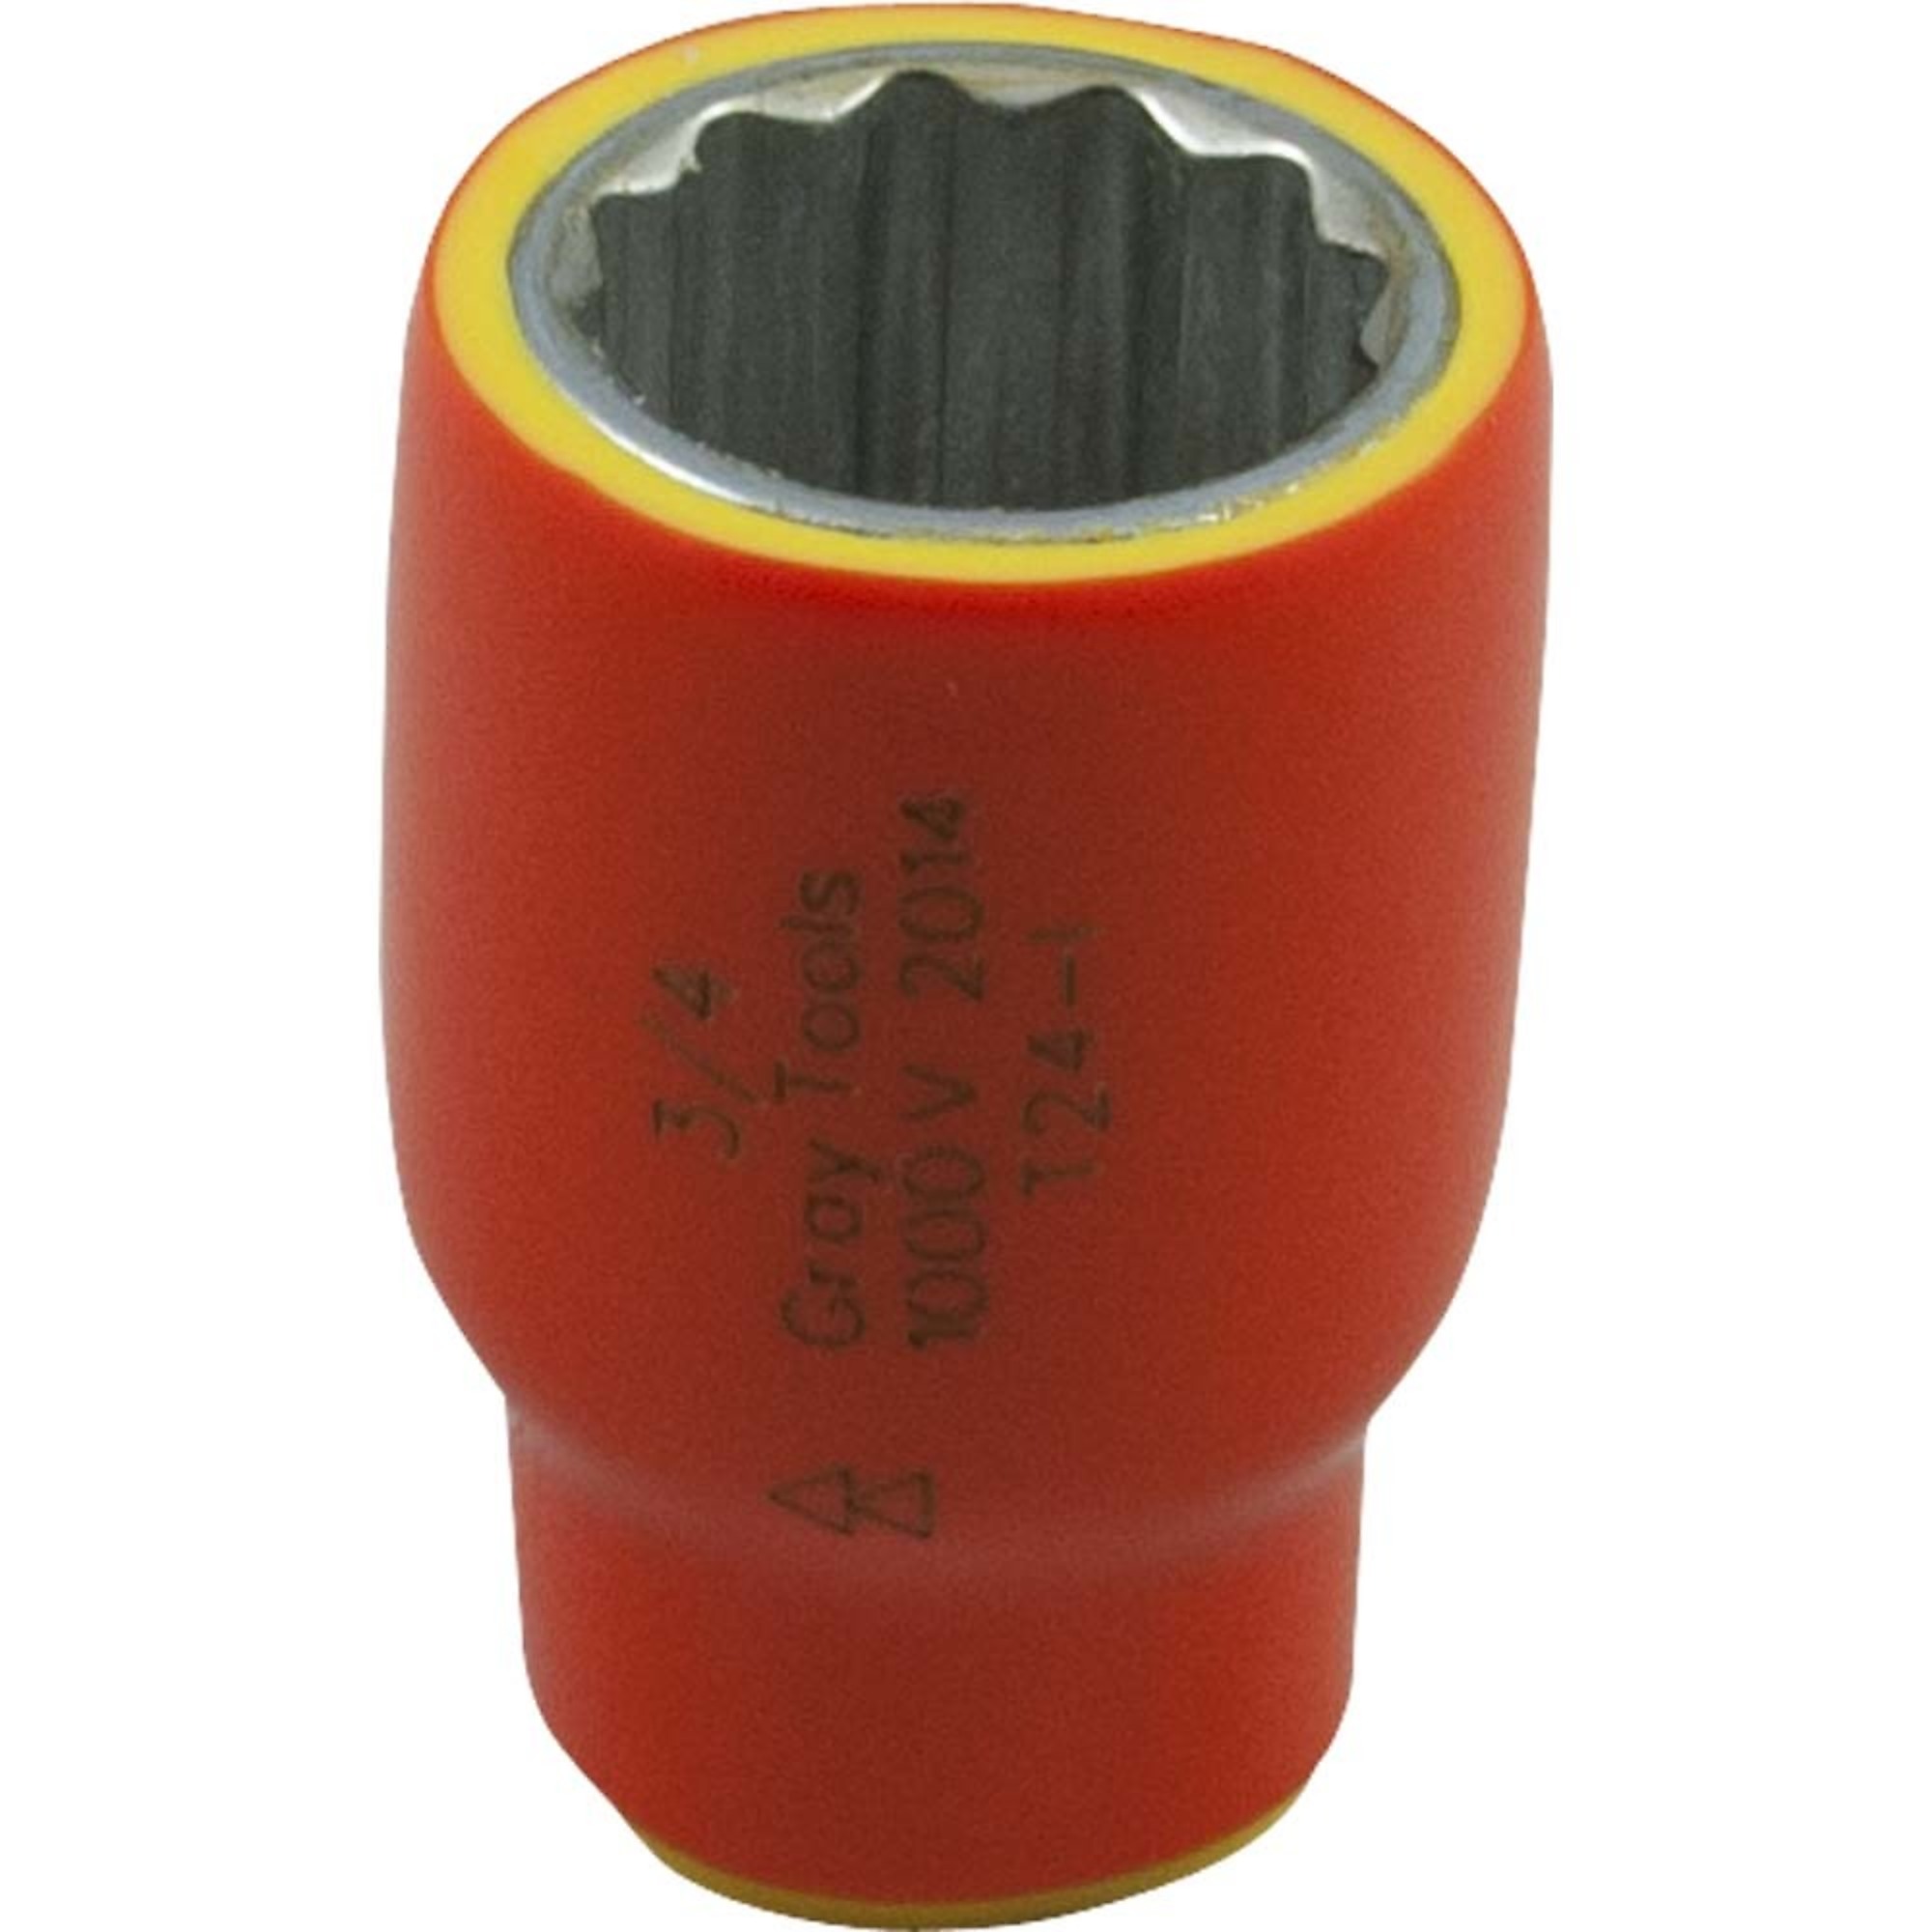 Gray Tools, 3/8Inch X 3/8Inch Drive Socket 1000V Insulated, Socket Size 3/8 in, Drive Size 3/8 in, Model T12-I